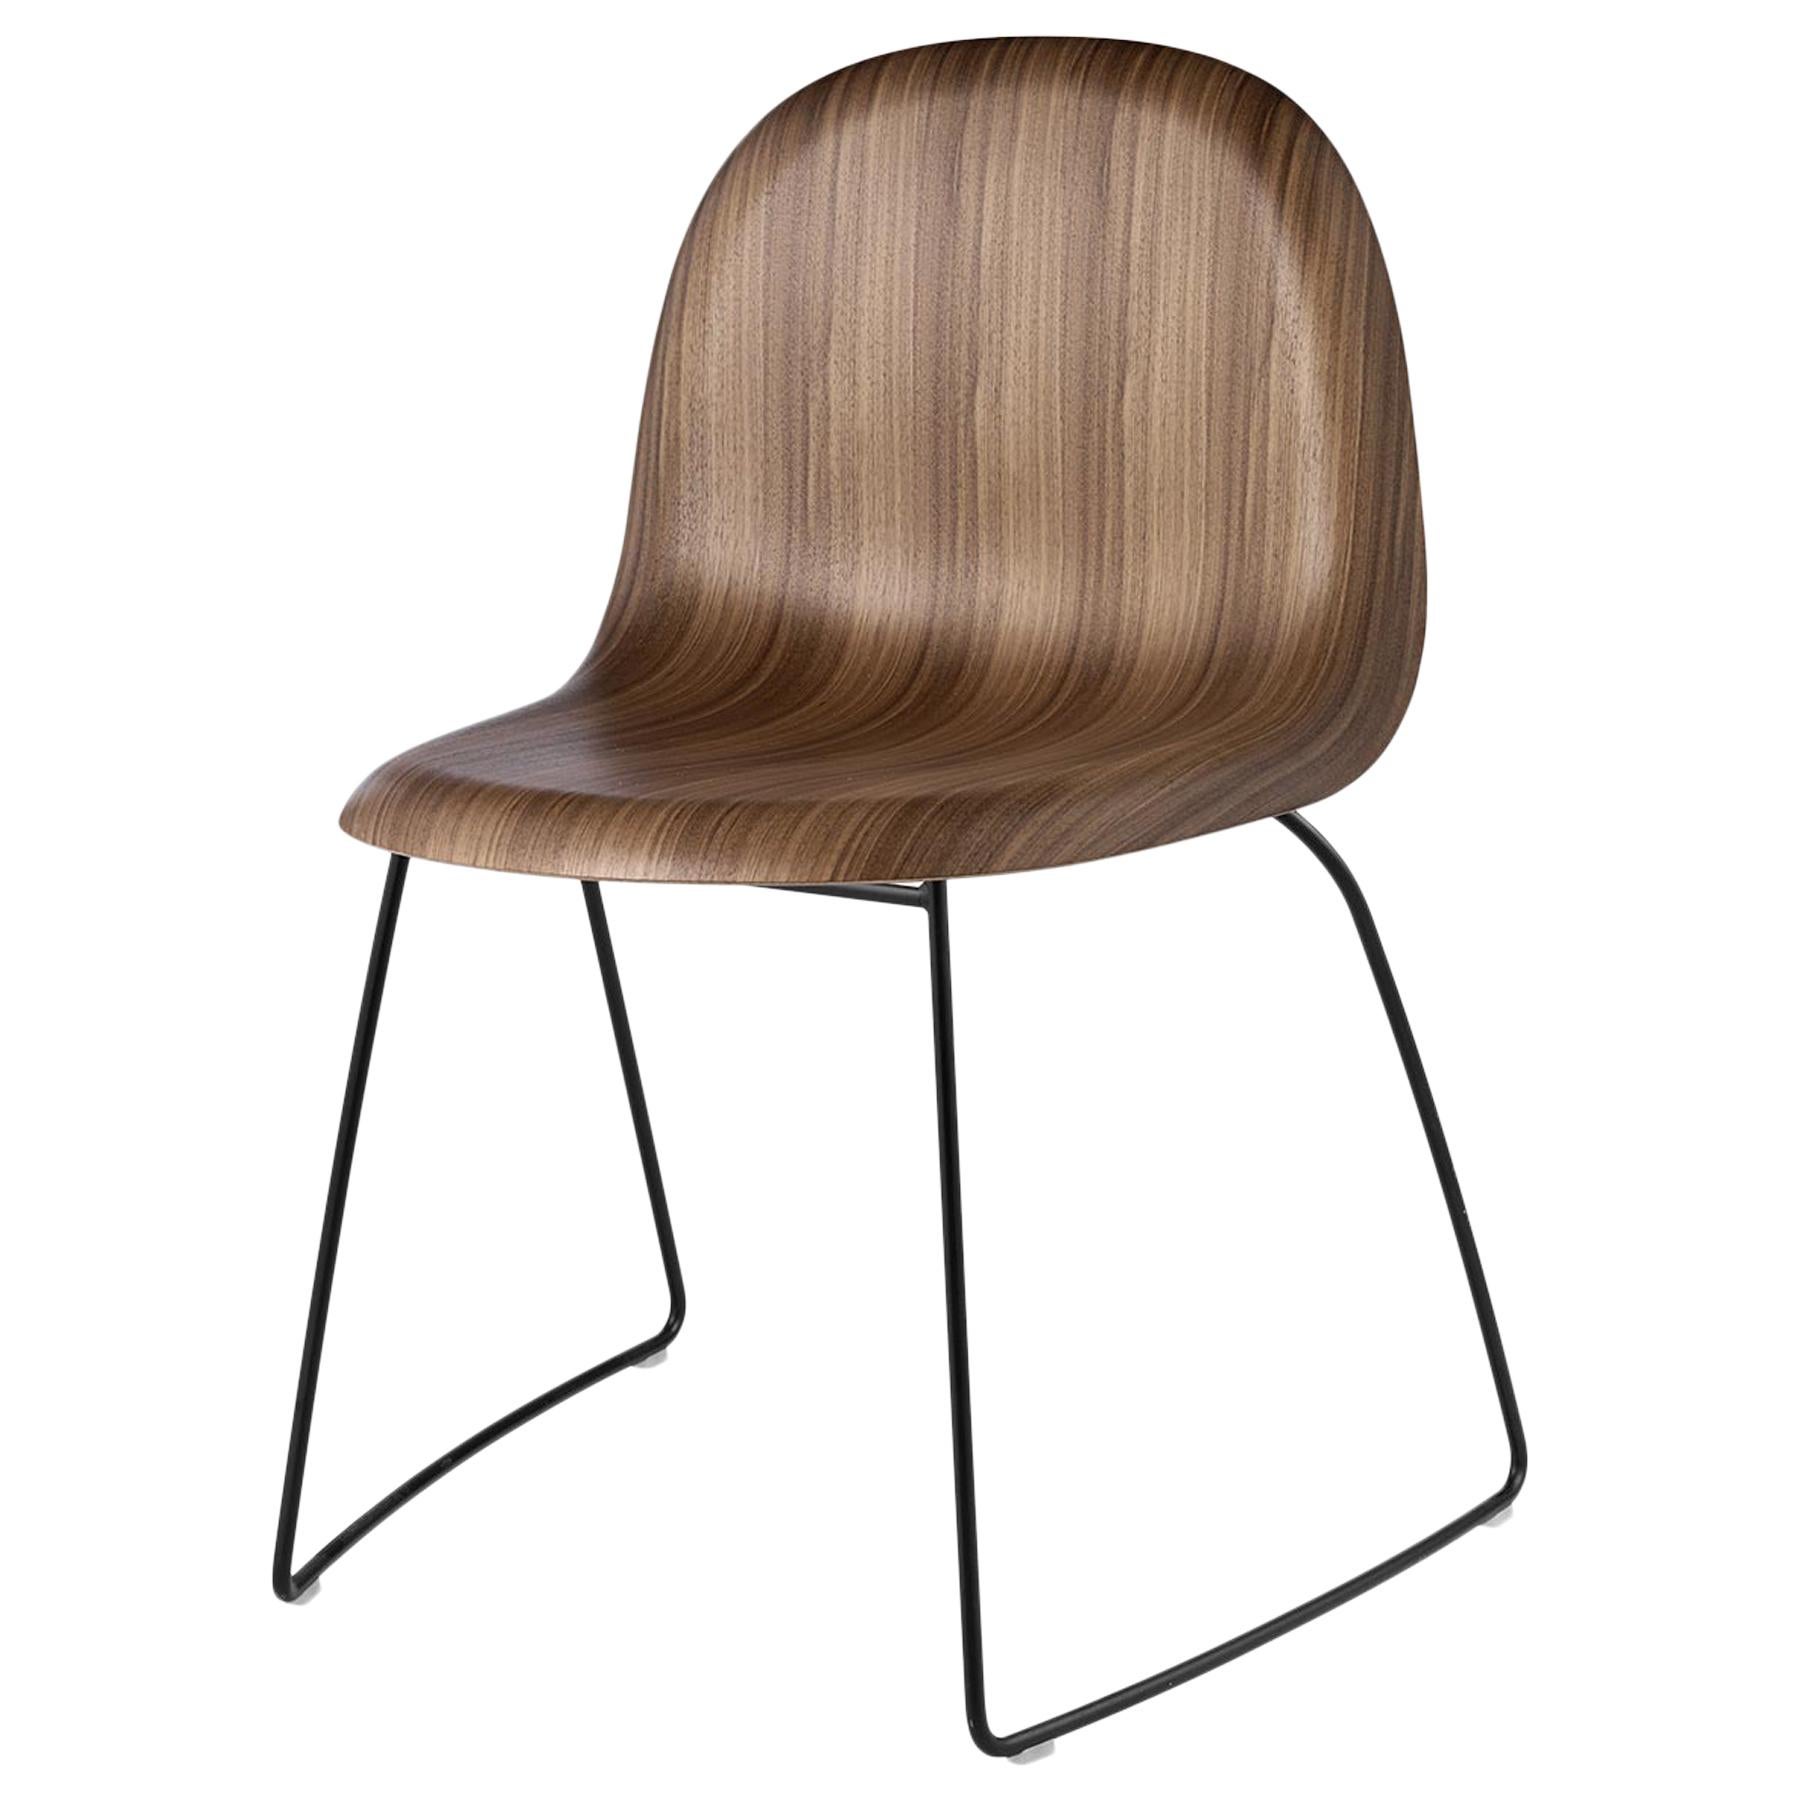 3D Dining Chair, Un-Upholstered, Sledge Base, Wood Shell